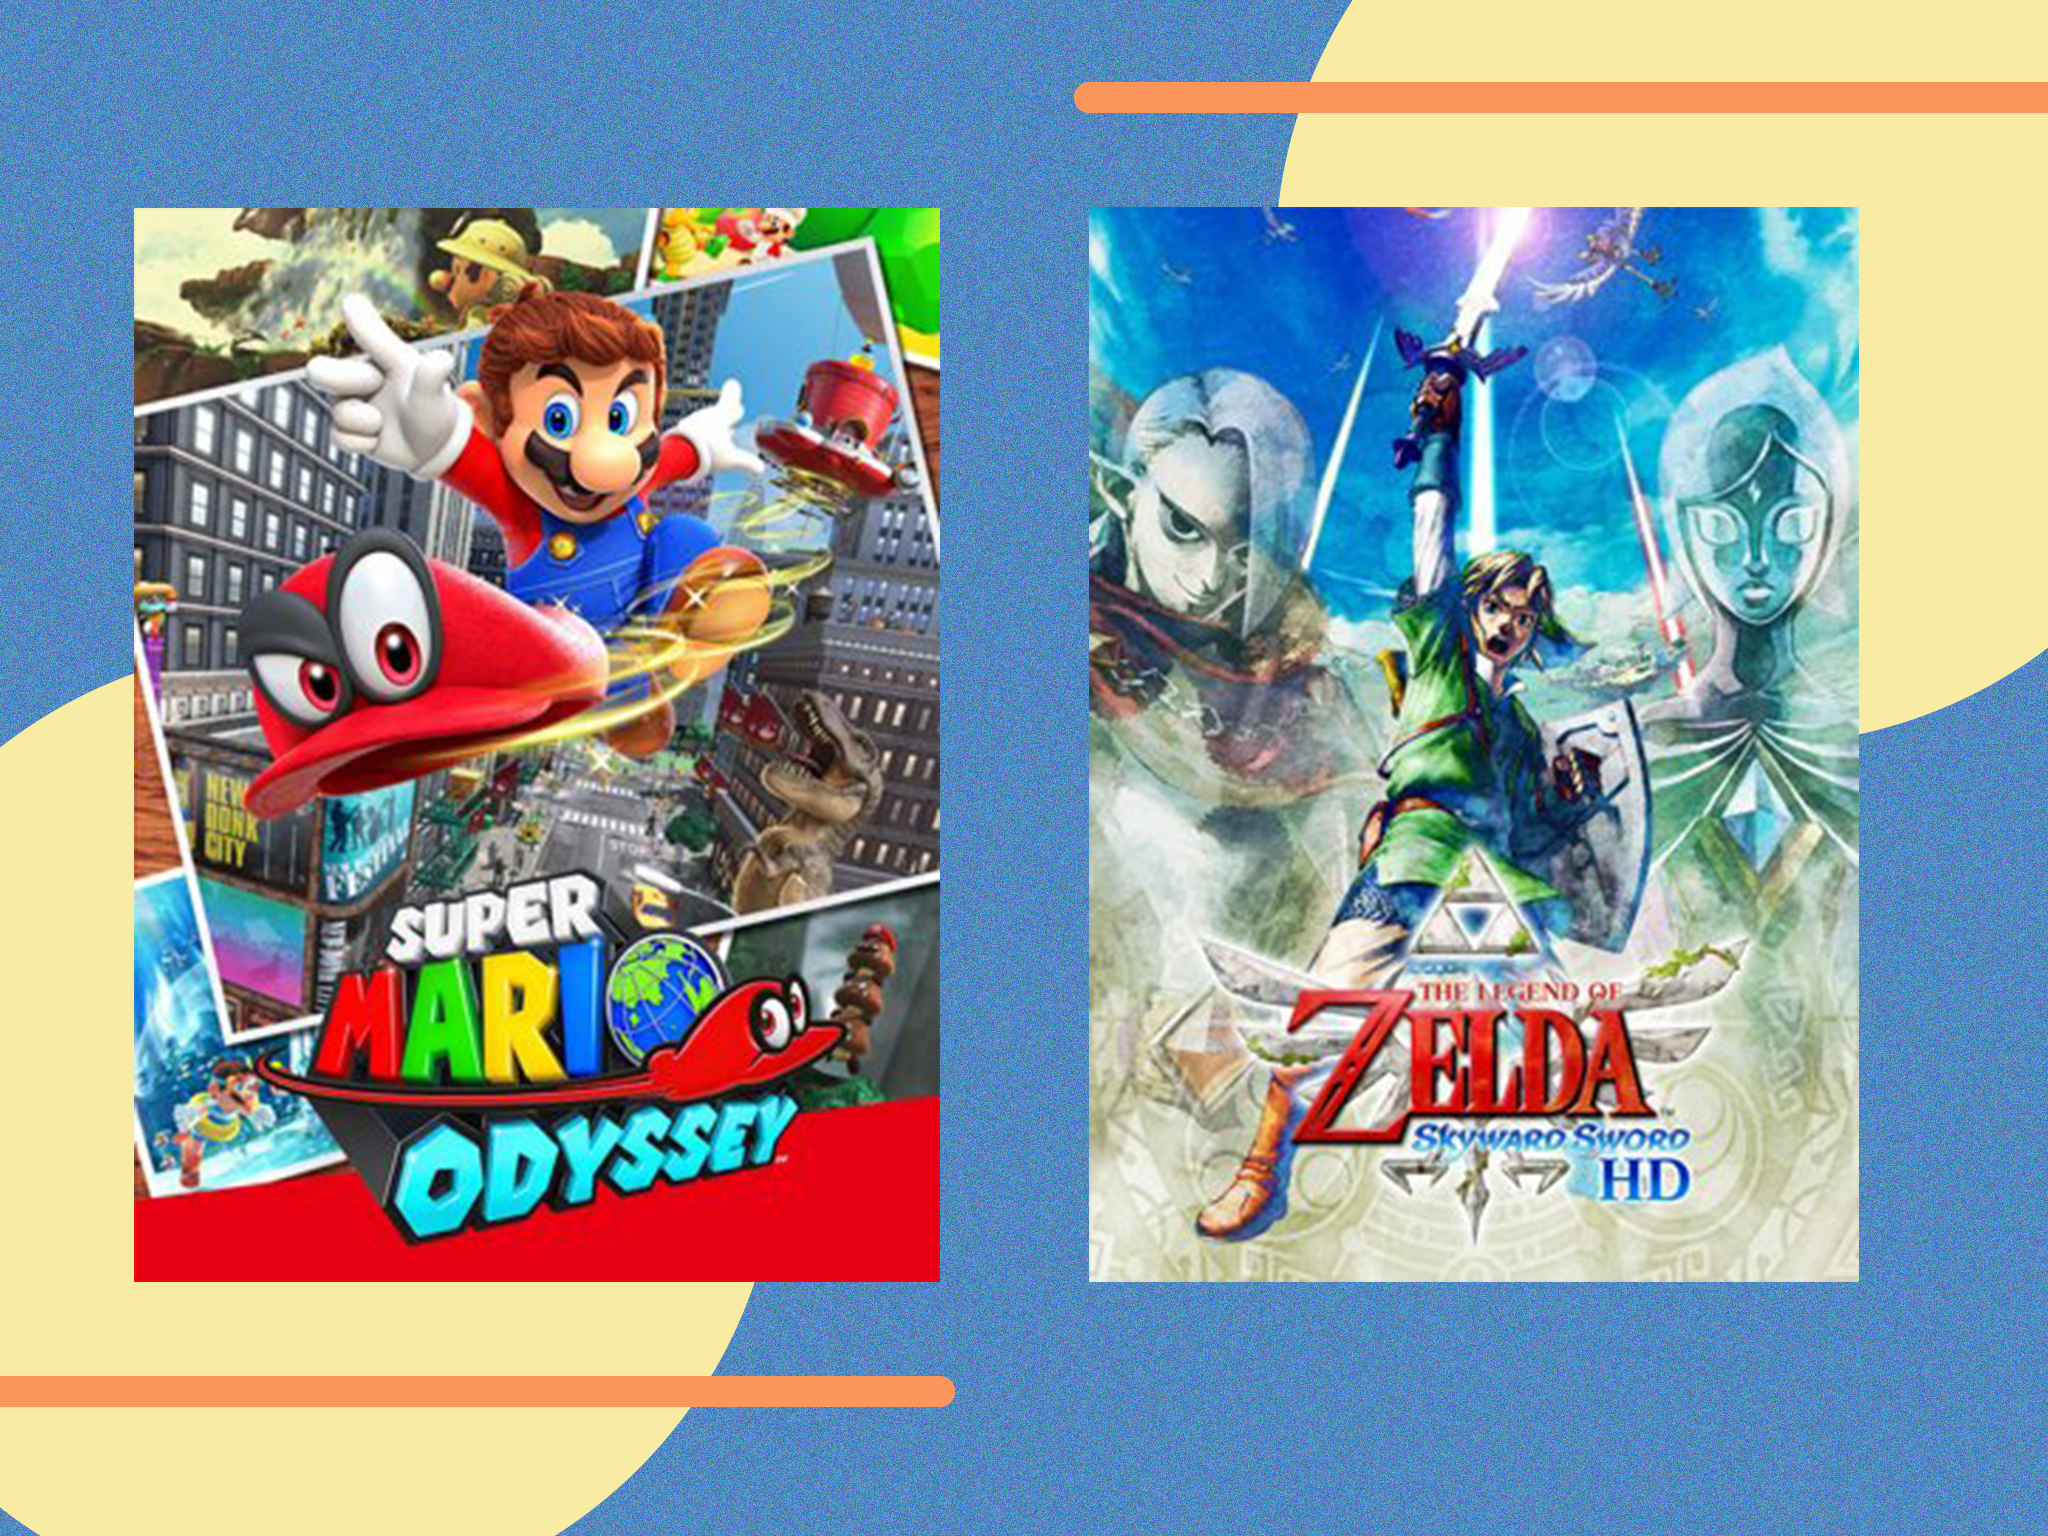 Odyssey and Skyward Sword are seeing a big discount